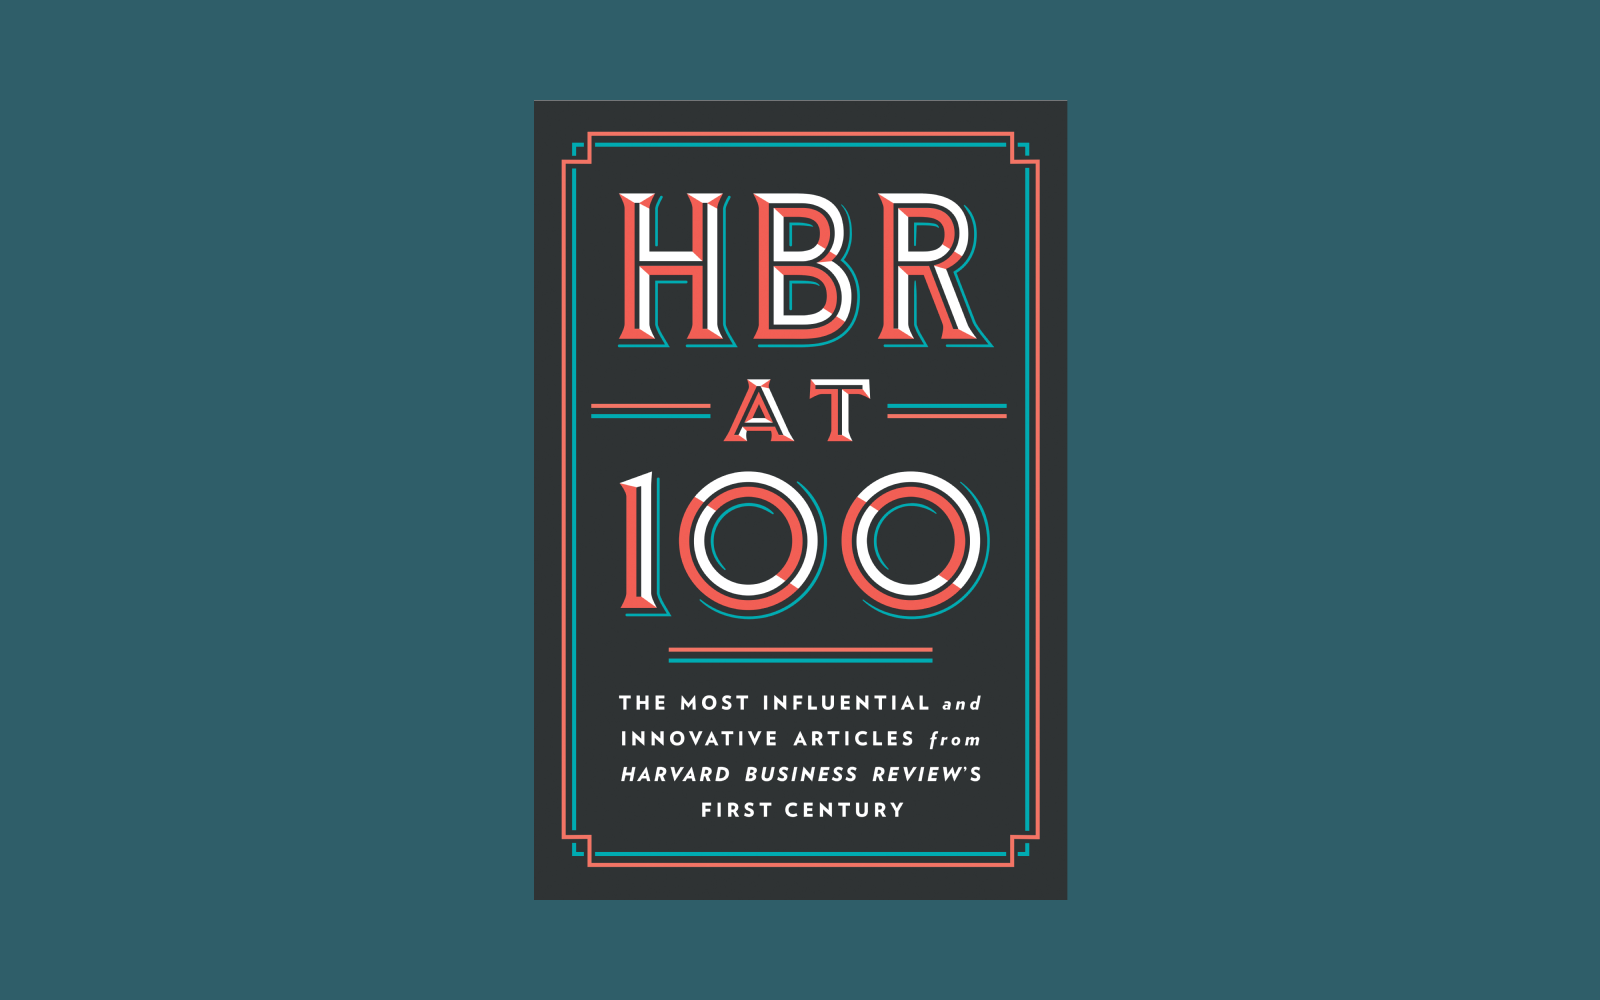 HBR at 100 book cover